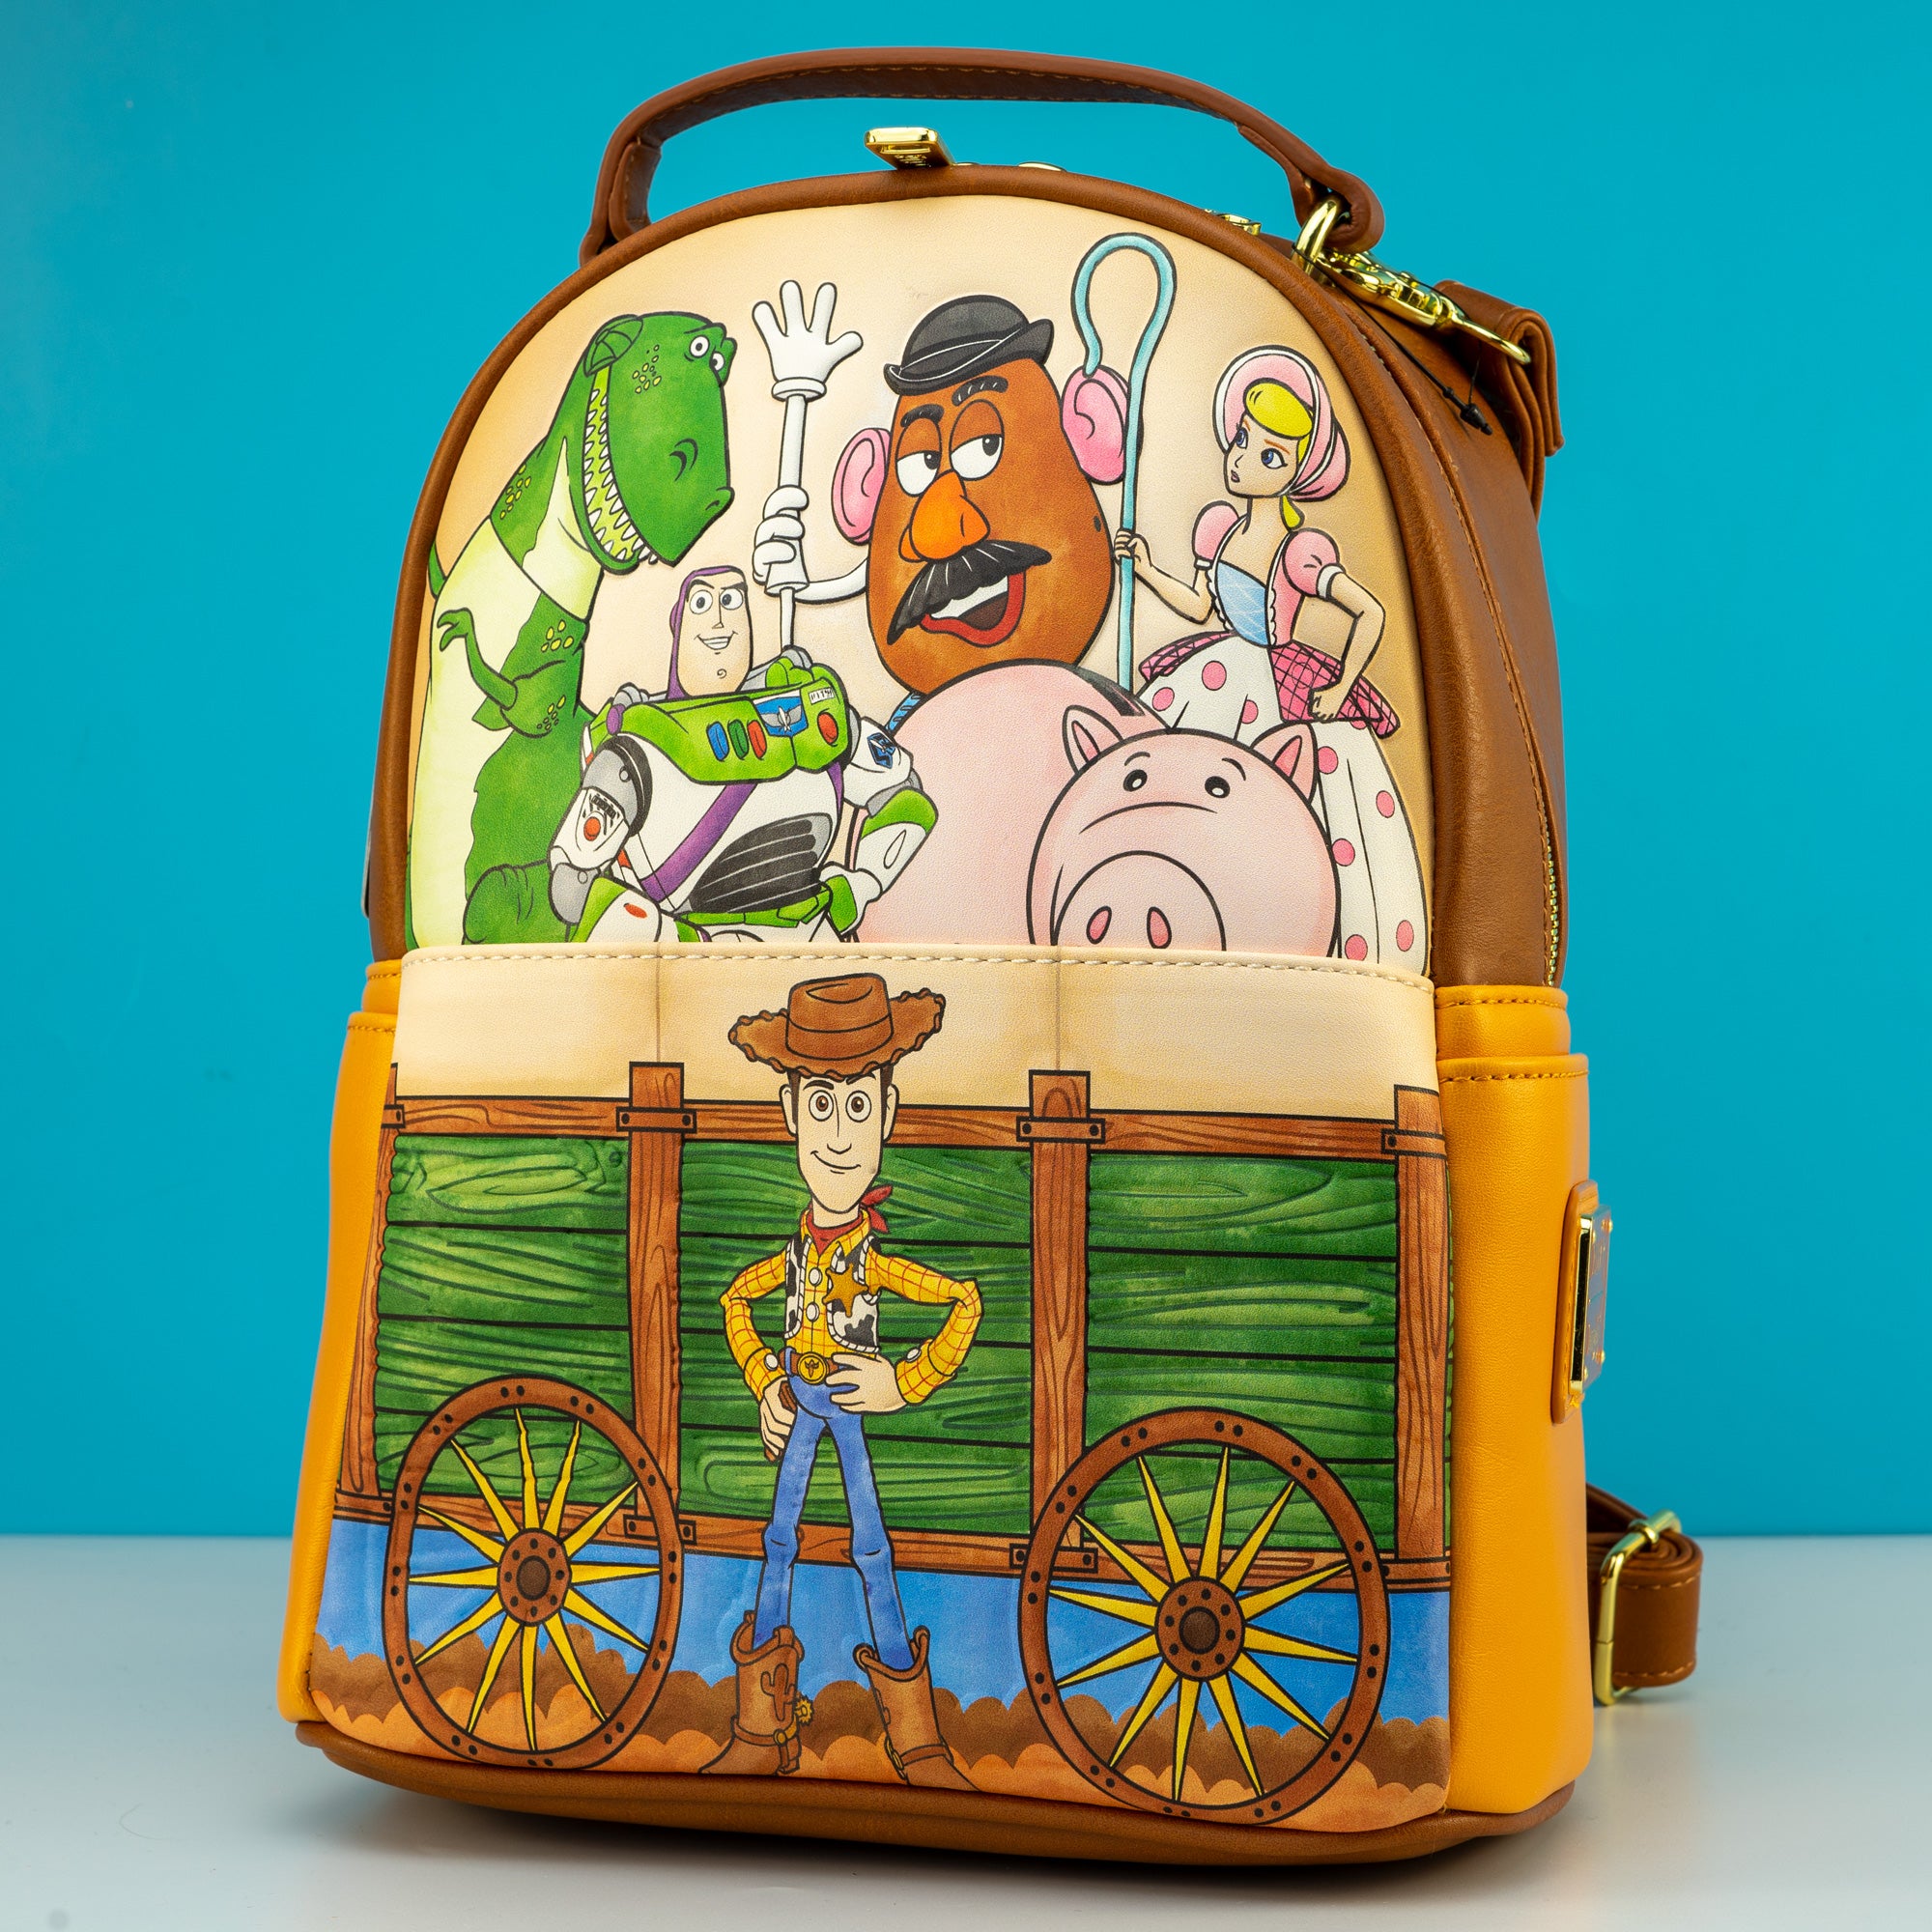 Loungefly x Disney Pixar Toy Story 25th Anniversary Mini Backpack